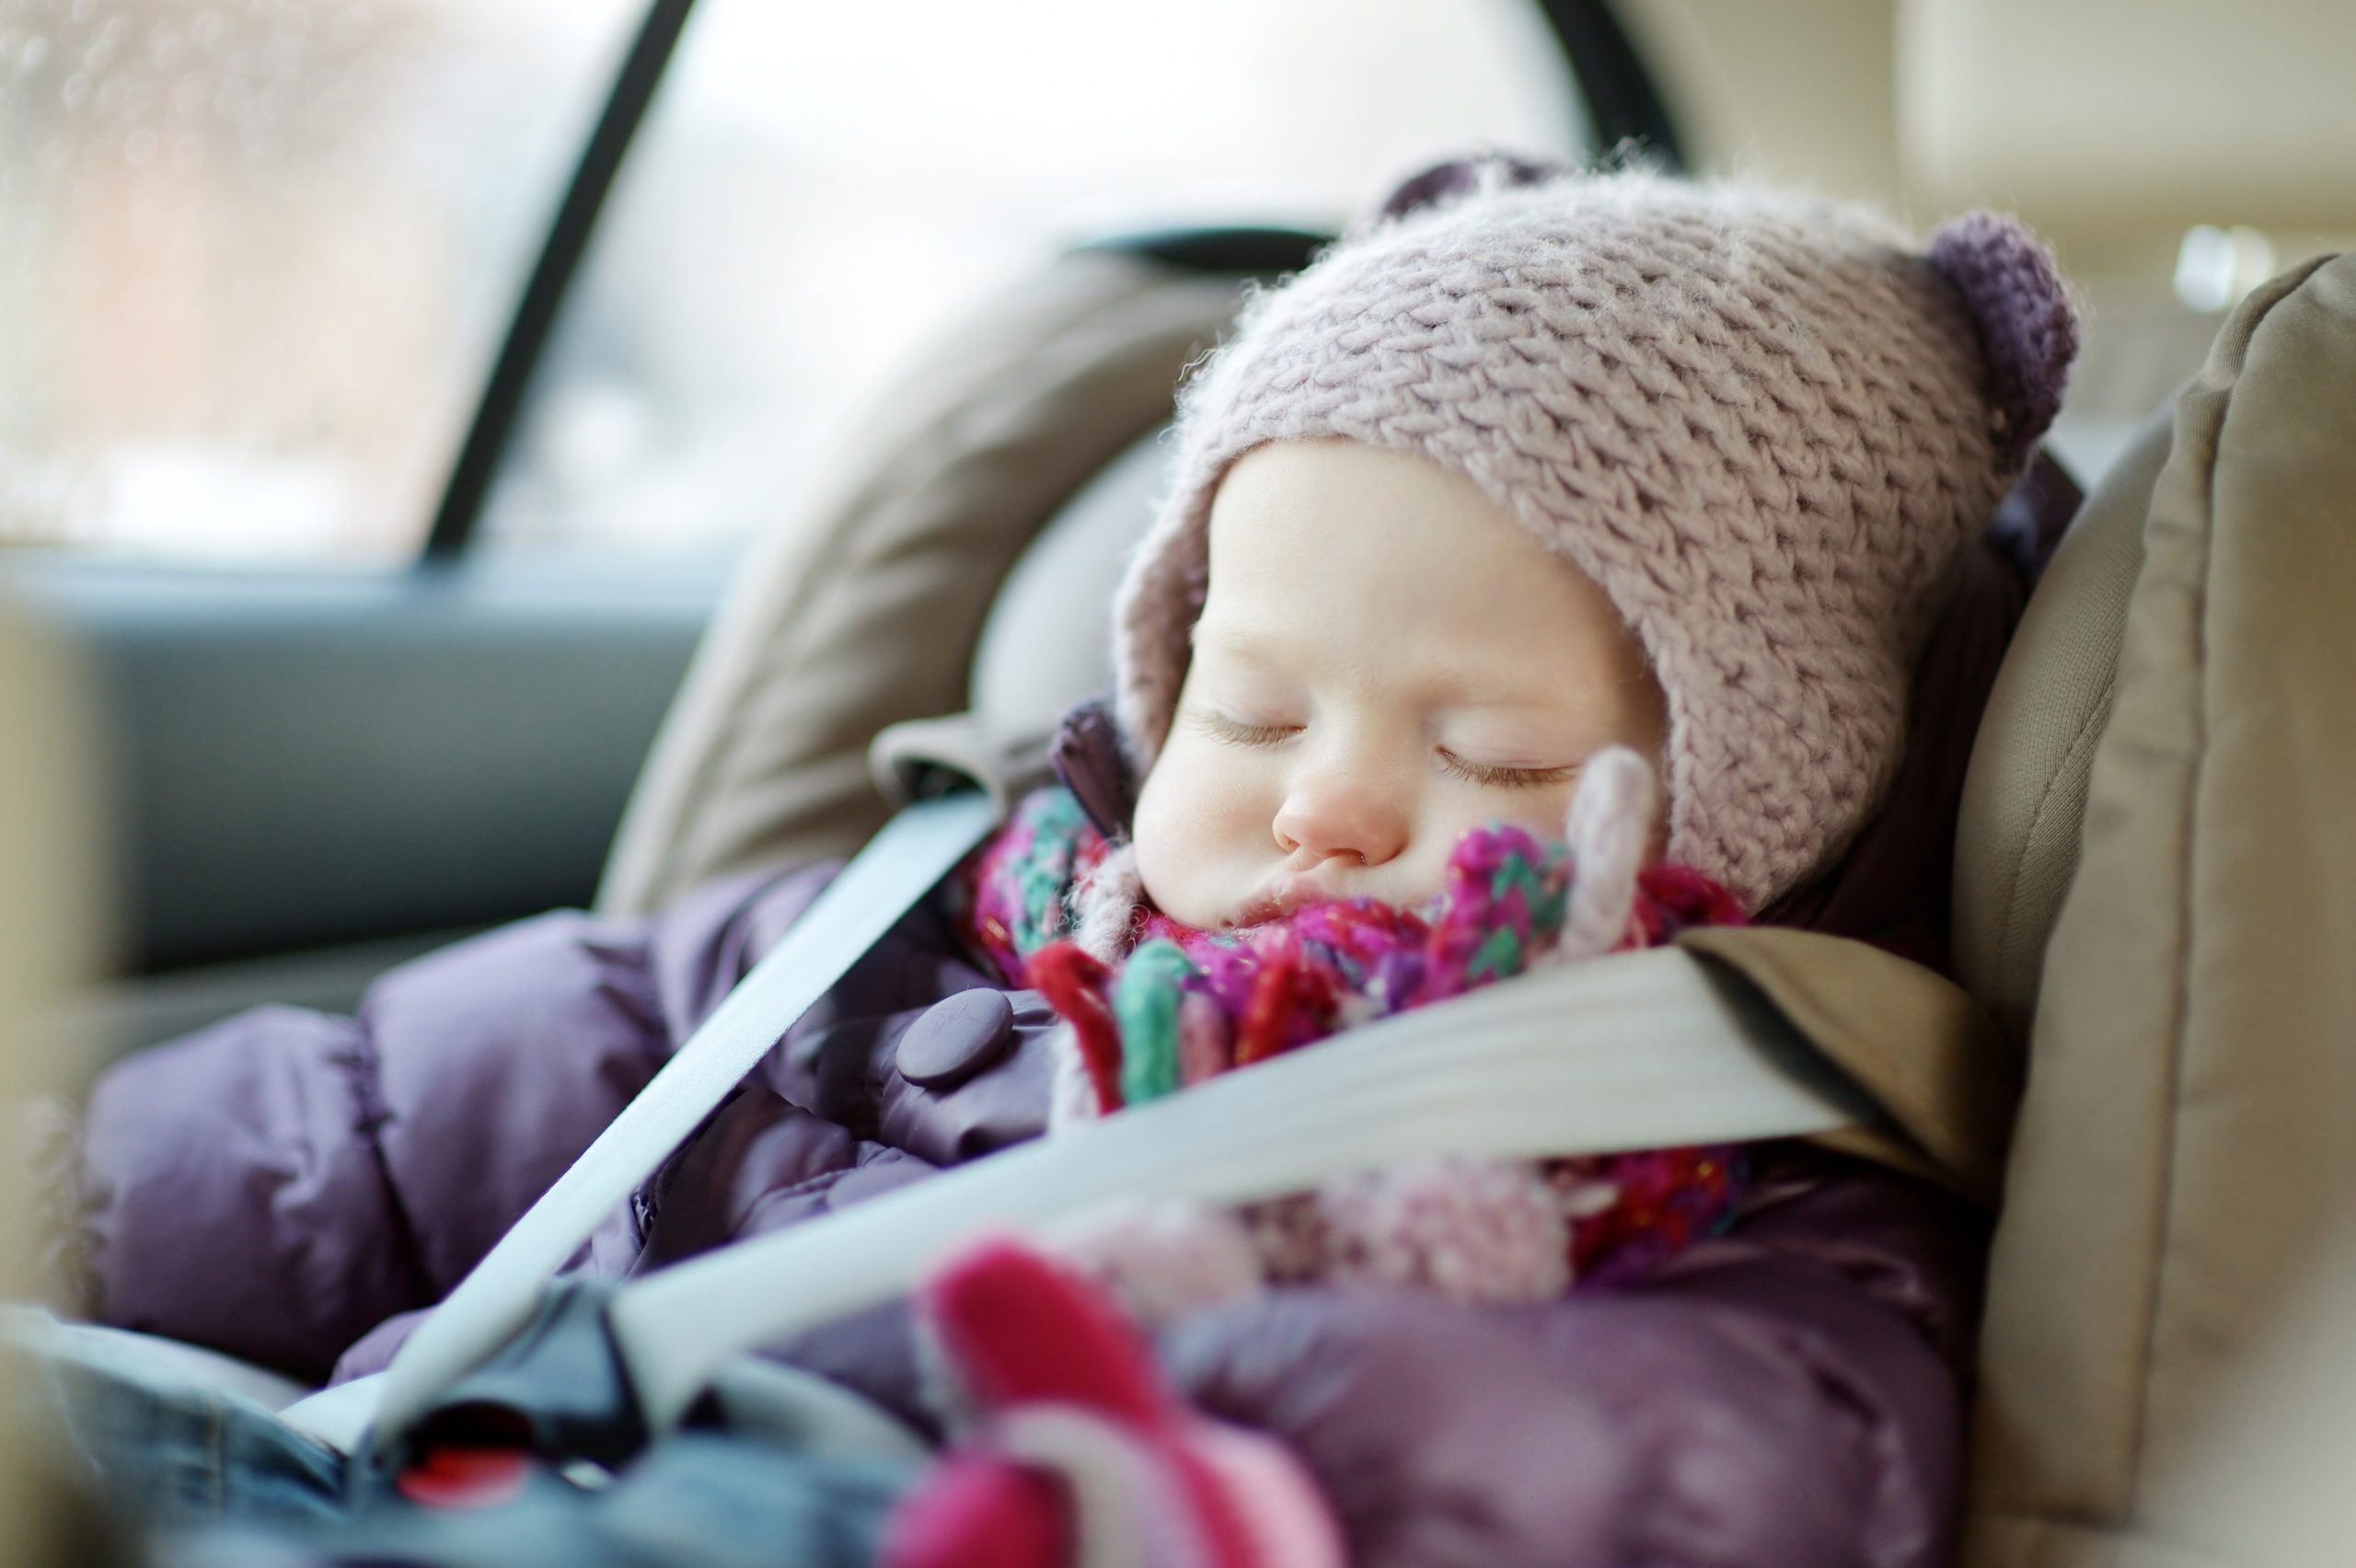 Winter Coats and Car Seats: A Dangerous Mix For Kids